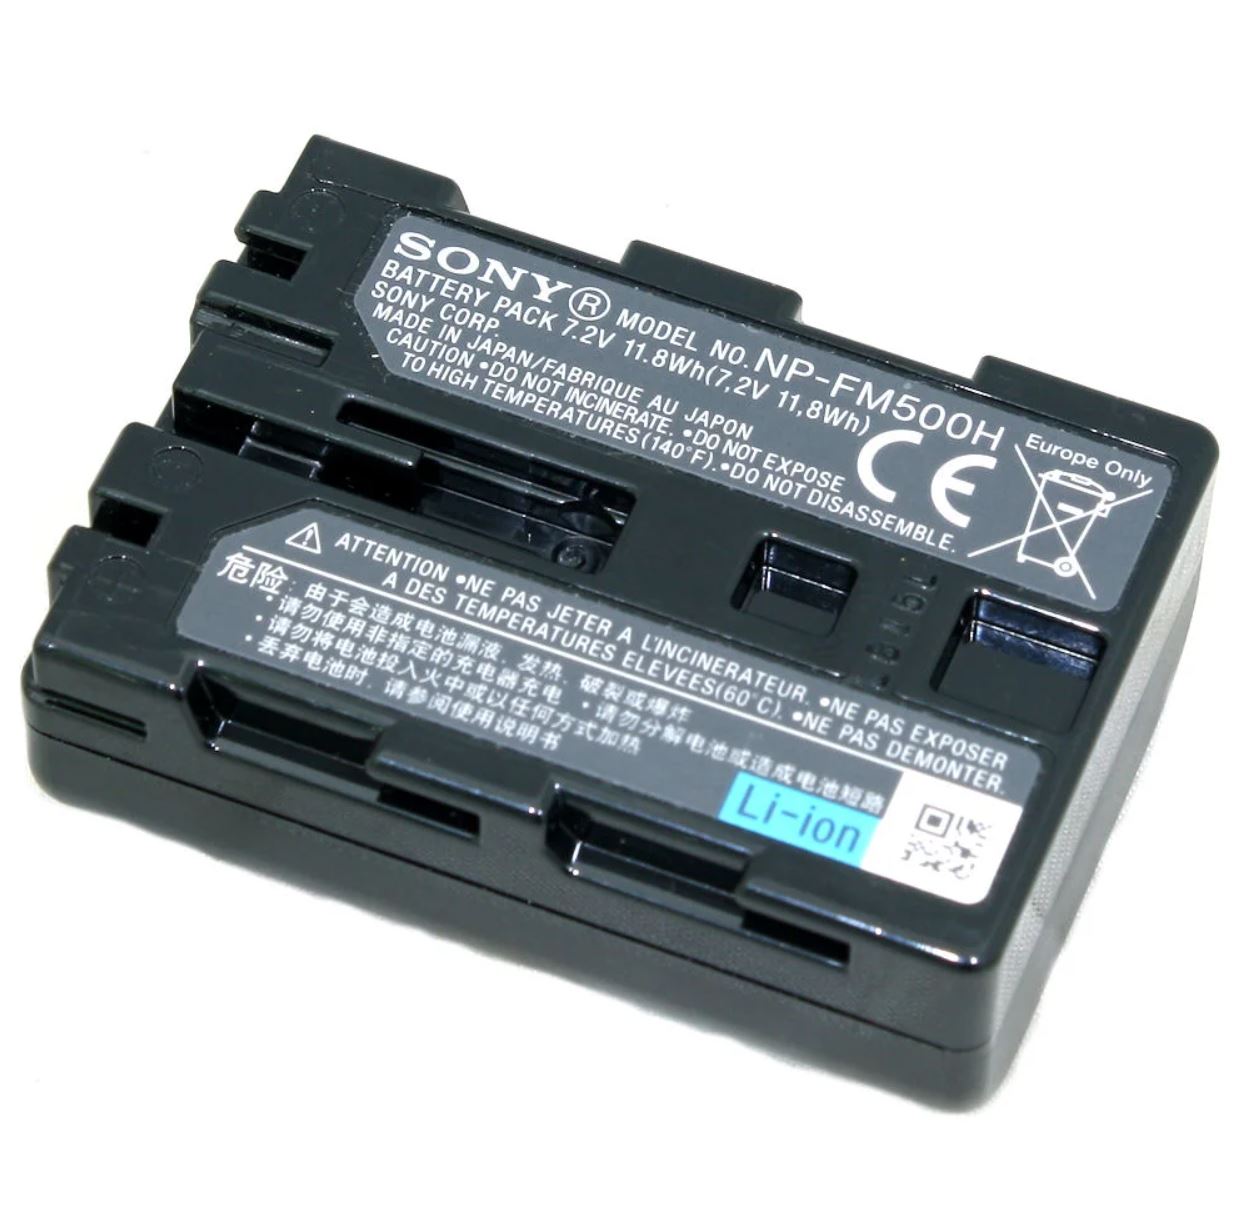 Pxel Sony NP-FM500H NPFM500H Rechargeable InfoLithium Battery (7.2V, 1600mAh) Lithium-Ion for Sony Alpha Digital SLR Cameras